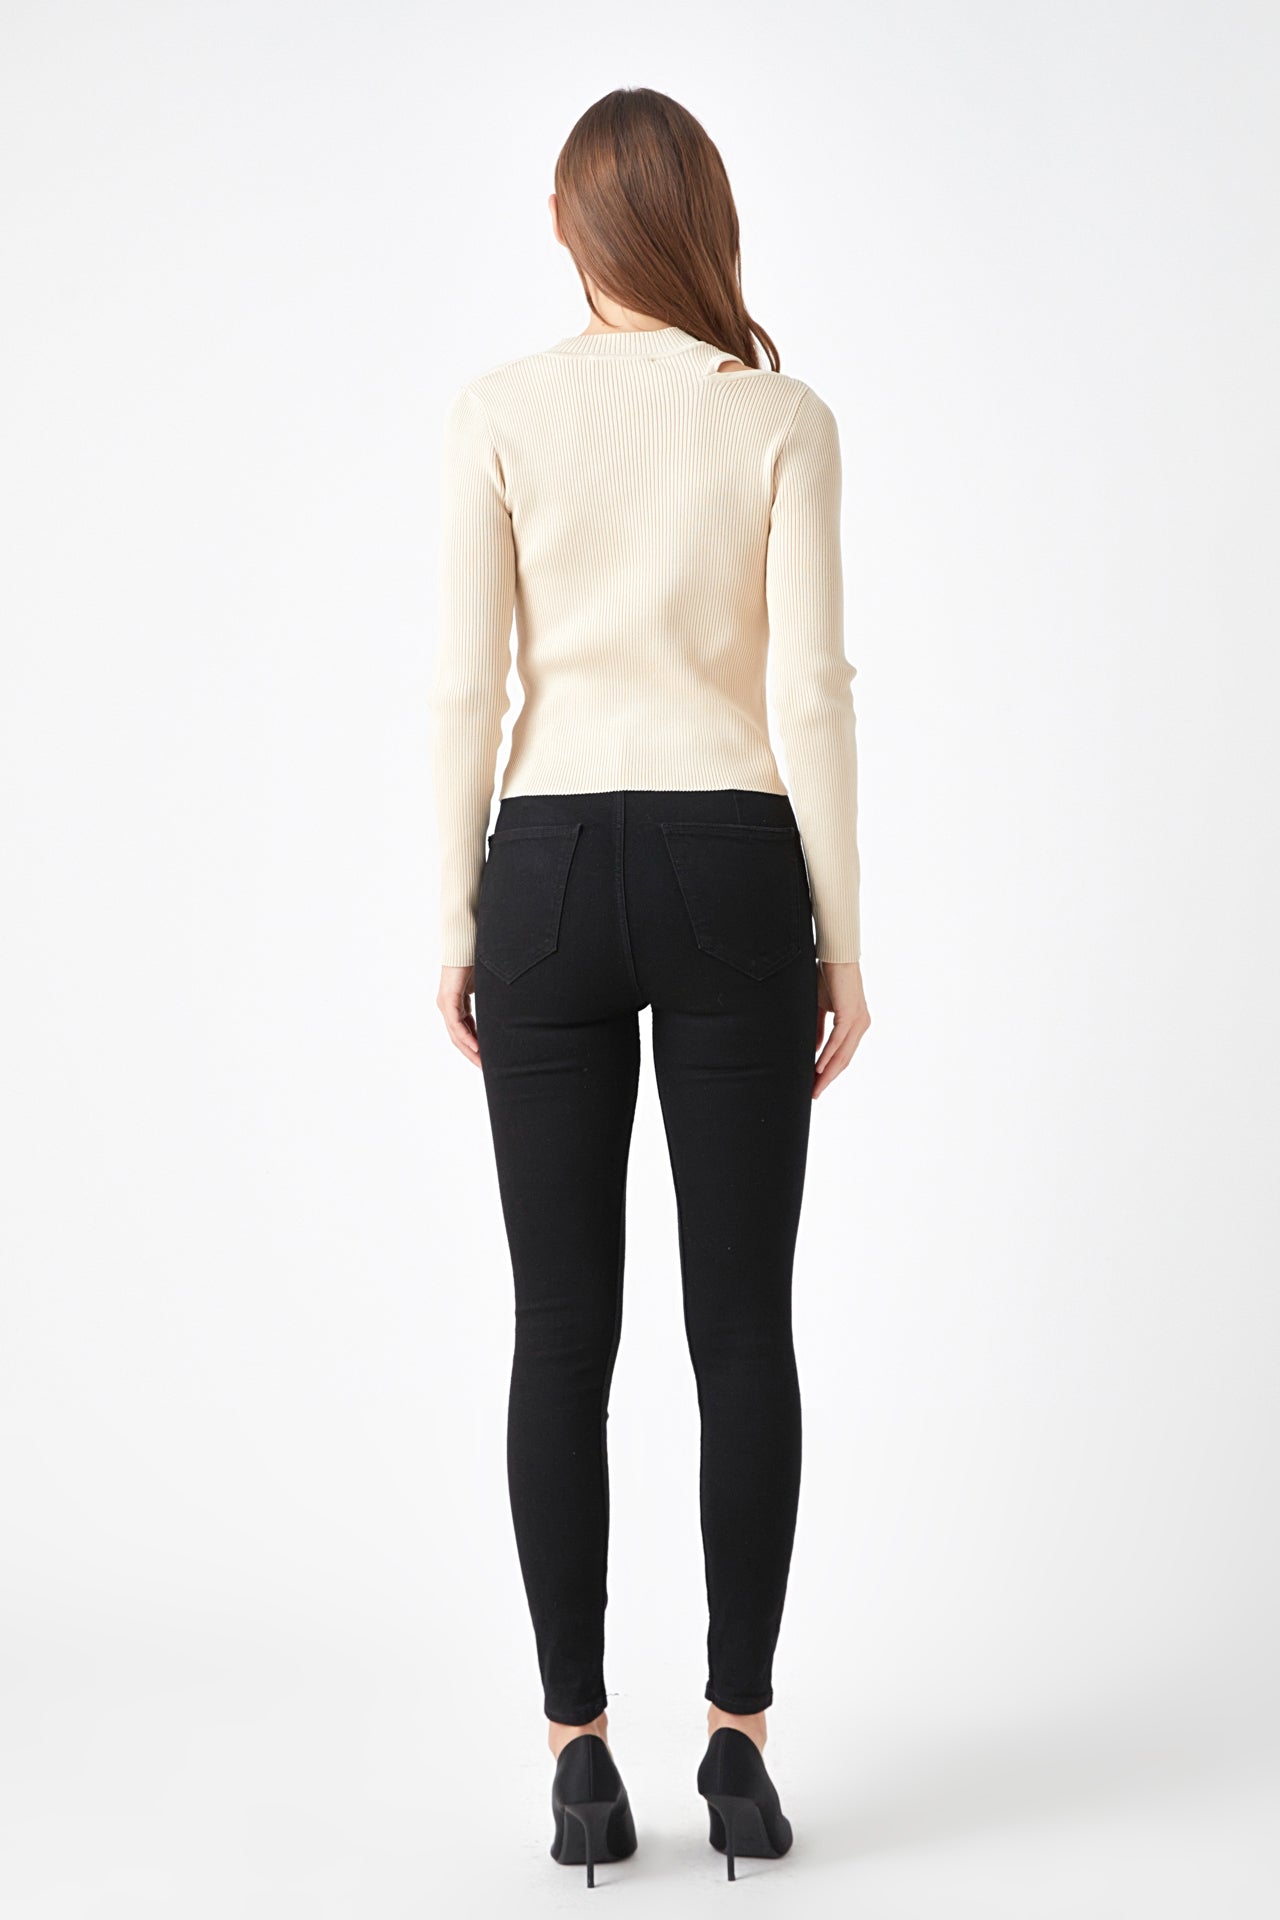 ENDLESS ROSE - Cut Out Sweater Top with Round Neckline - TOPS available at Objectrare